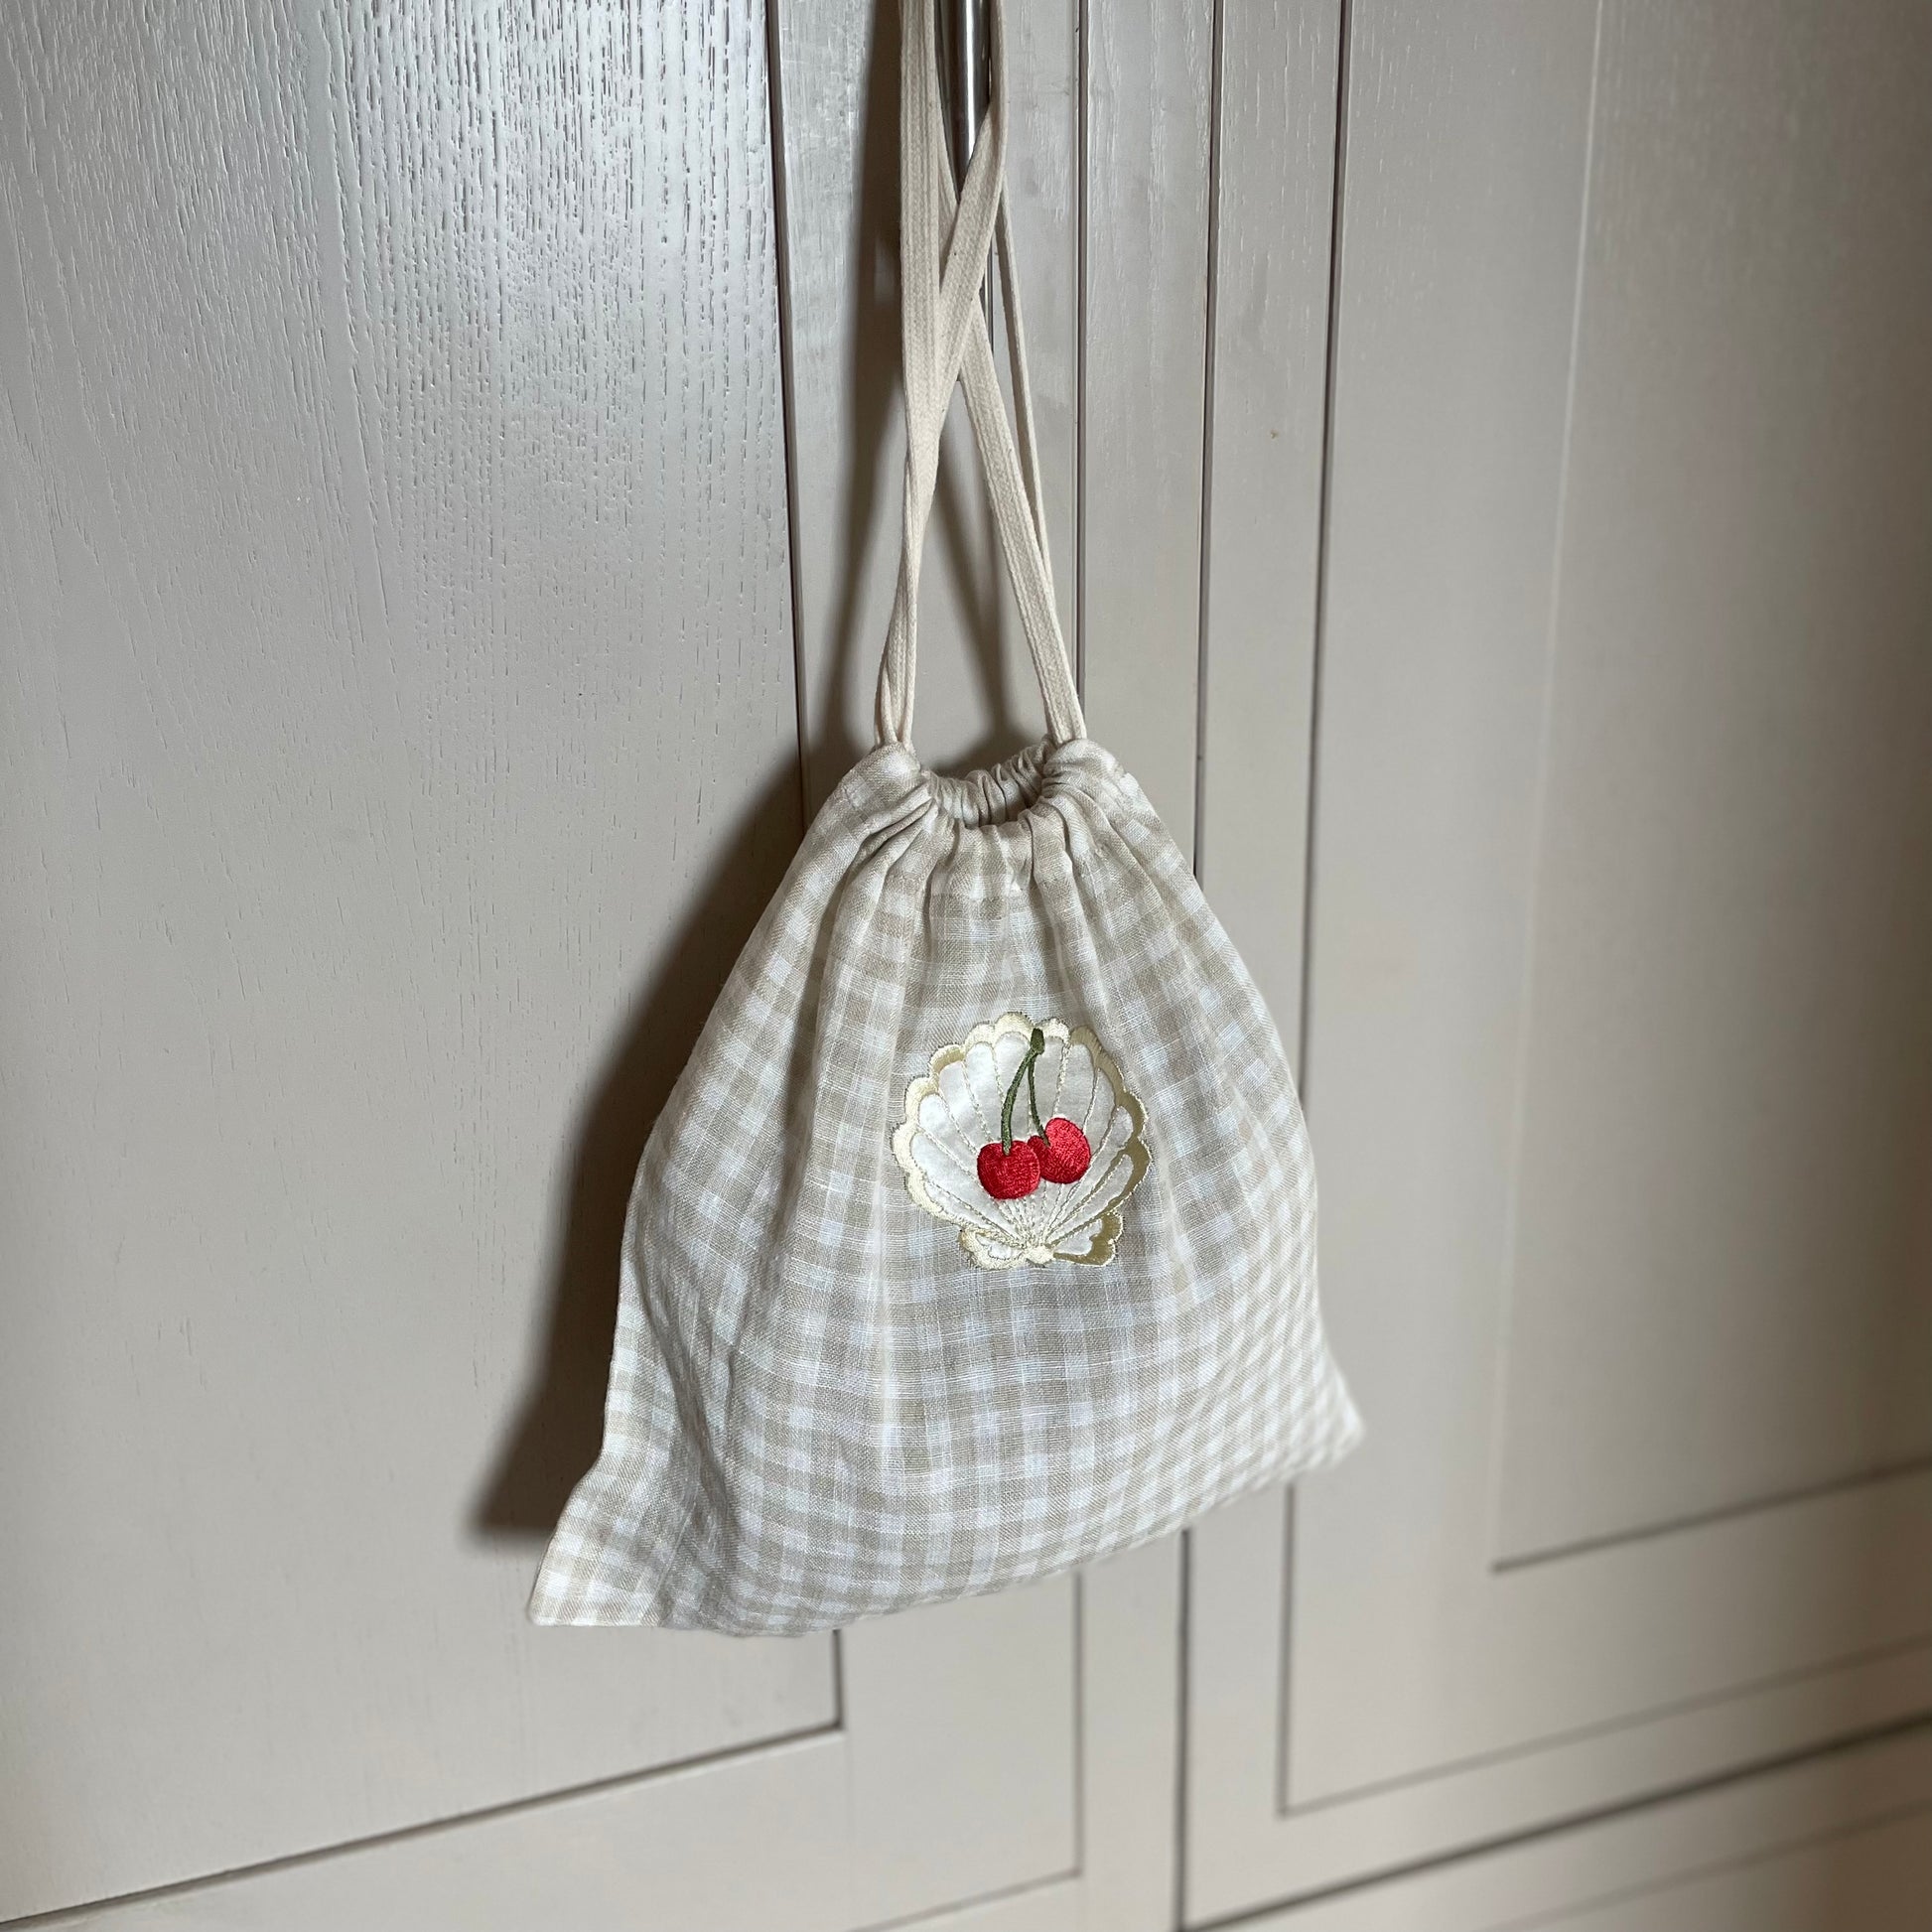 Drawstring linen bag with embroidered cherries hanging on a grey wooden cupboard door